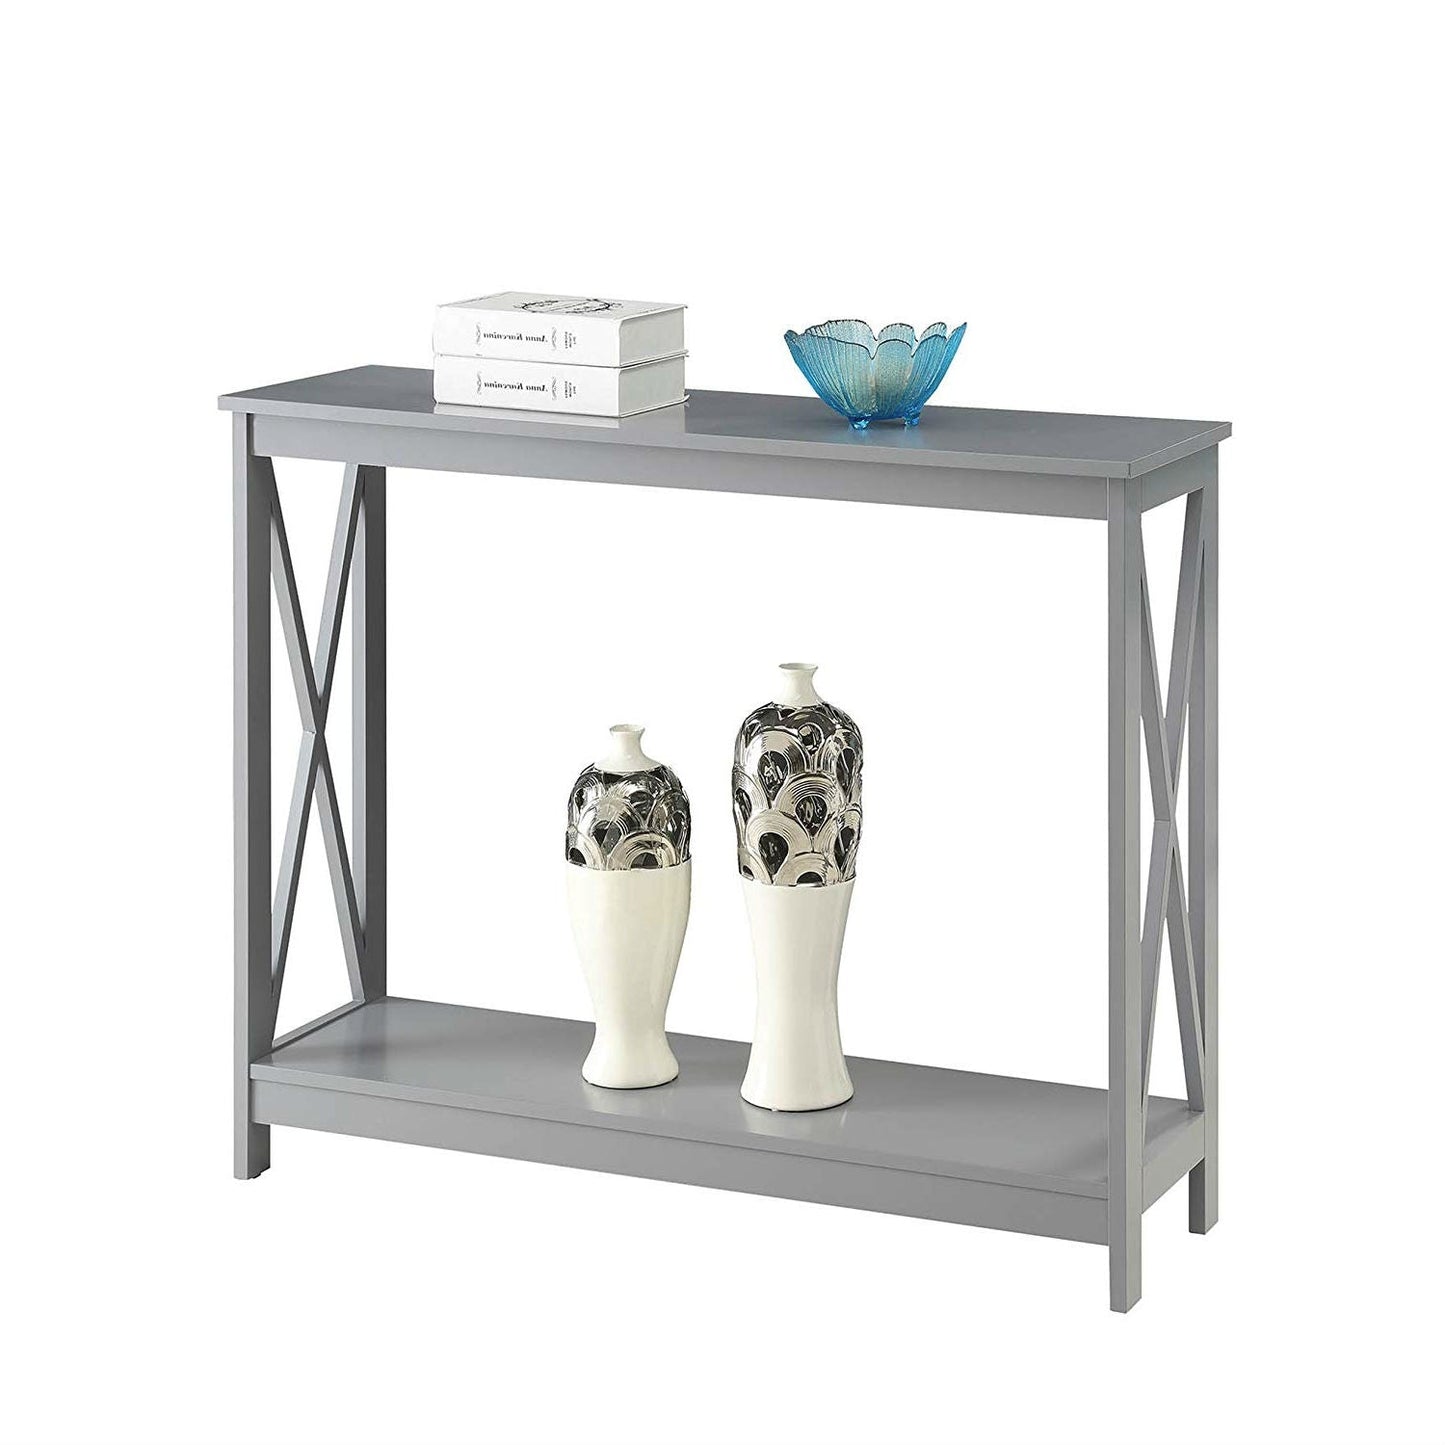 Living Room > Console & Sofa Tables - Grey Wood Console Sofa Table With Bottom Storage Shelf